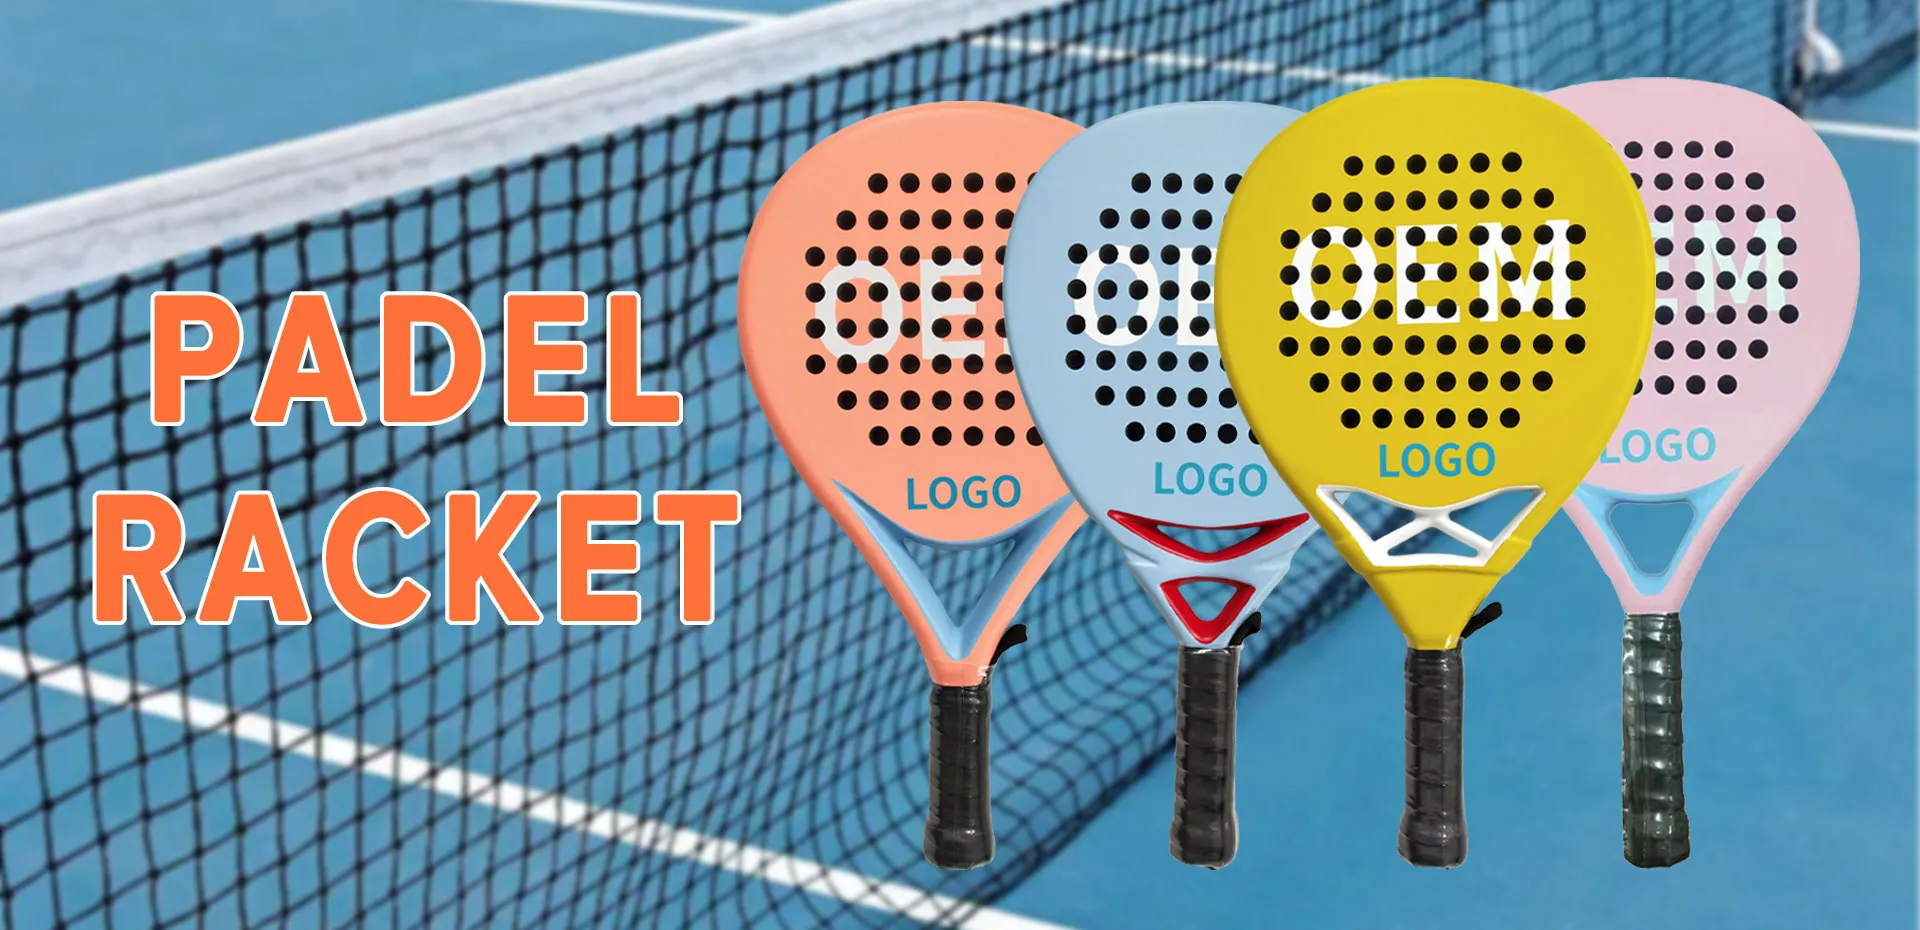 Paddle Racket Suppliers